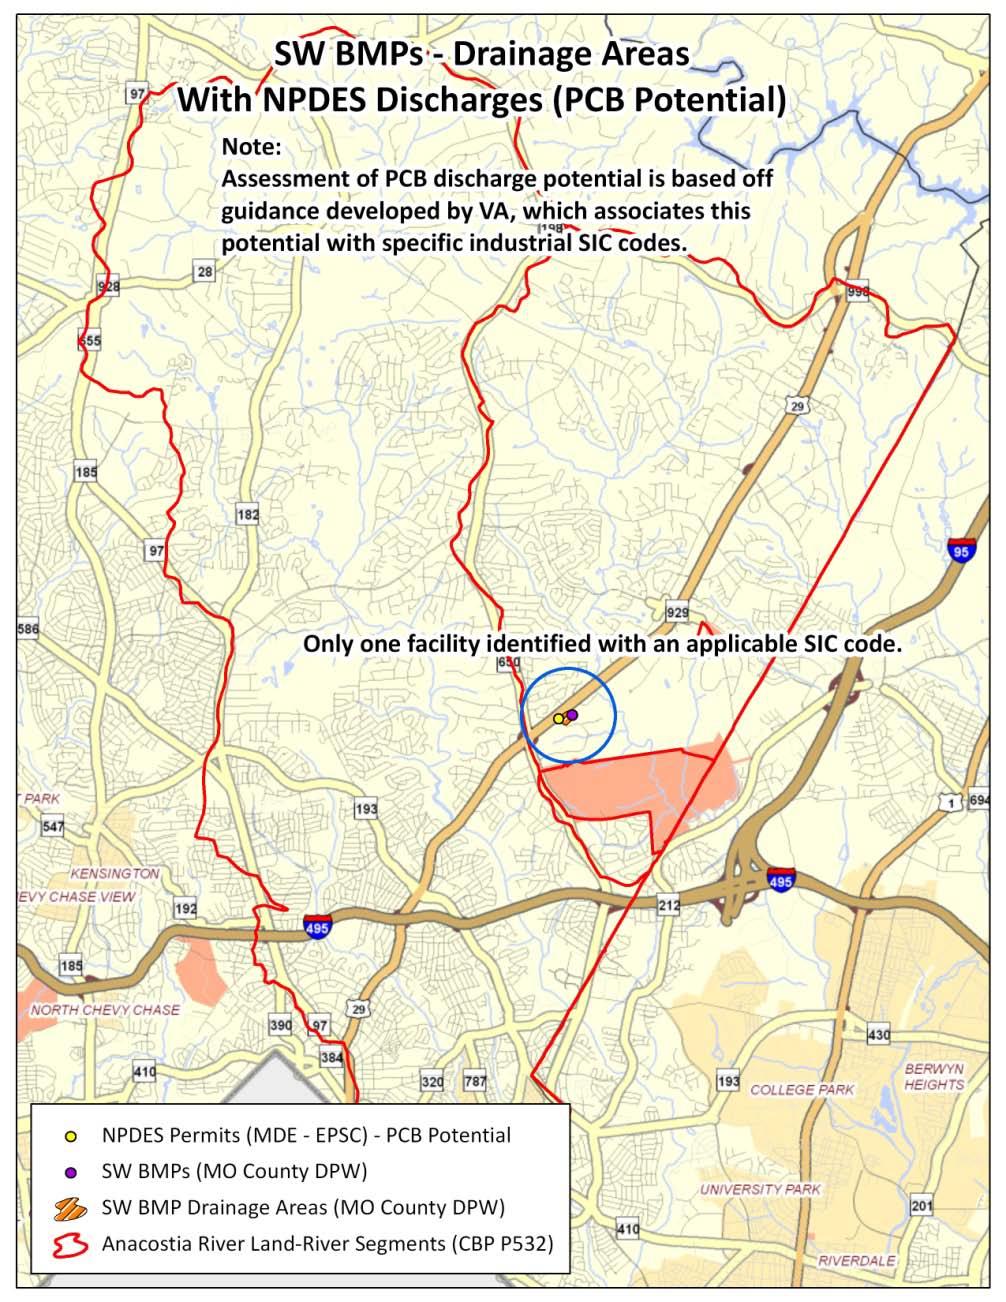 Stormwater BMP Source Tracking Methodology NPDES Permit Focus Virginia has developed guidance that they use to focus PCB sampling efforts at industrial facilities.